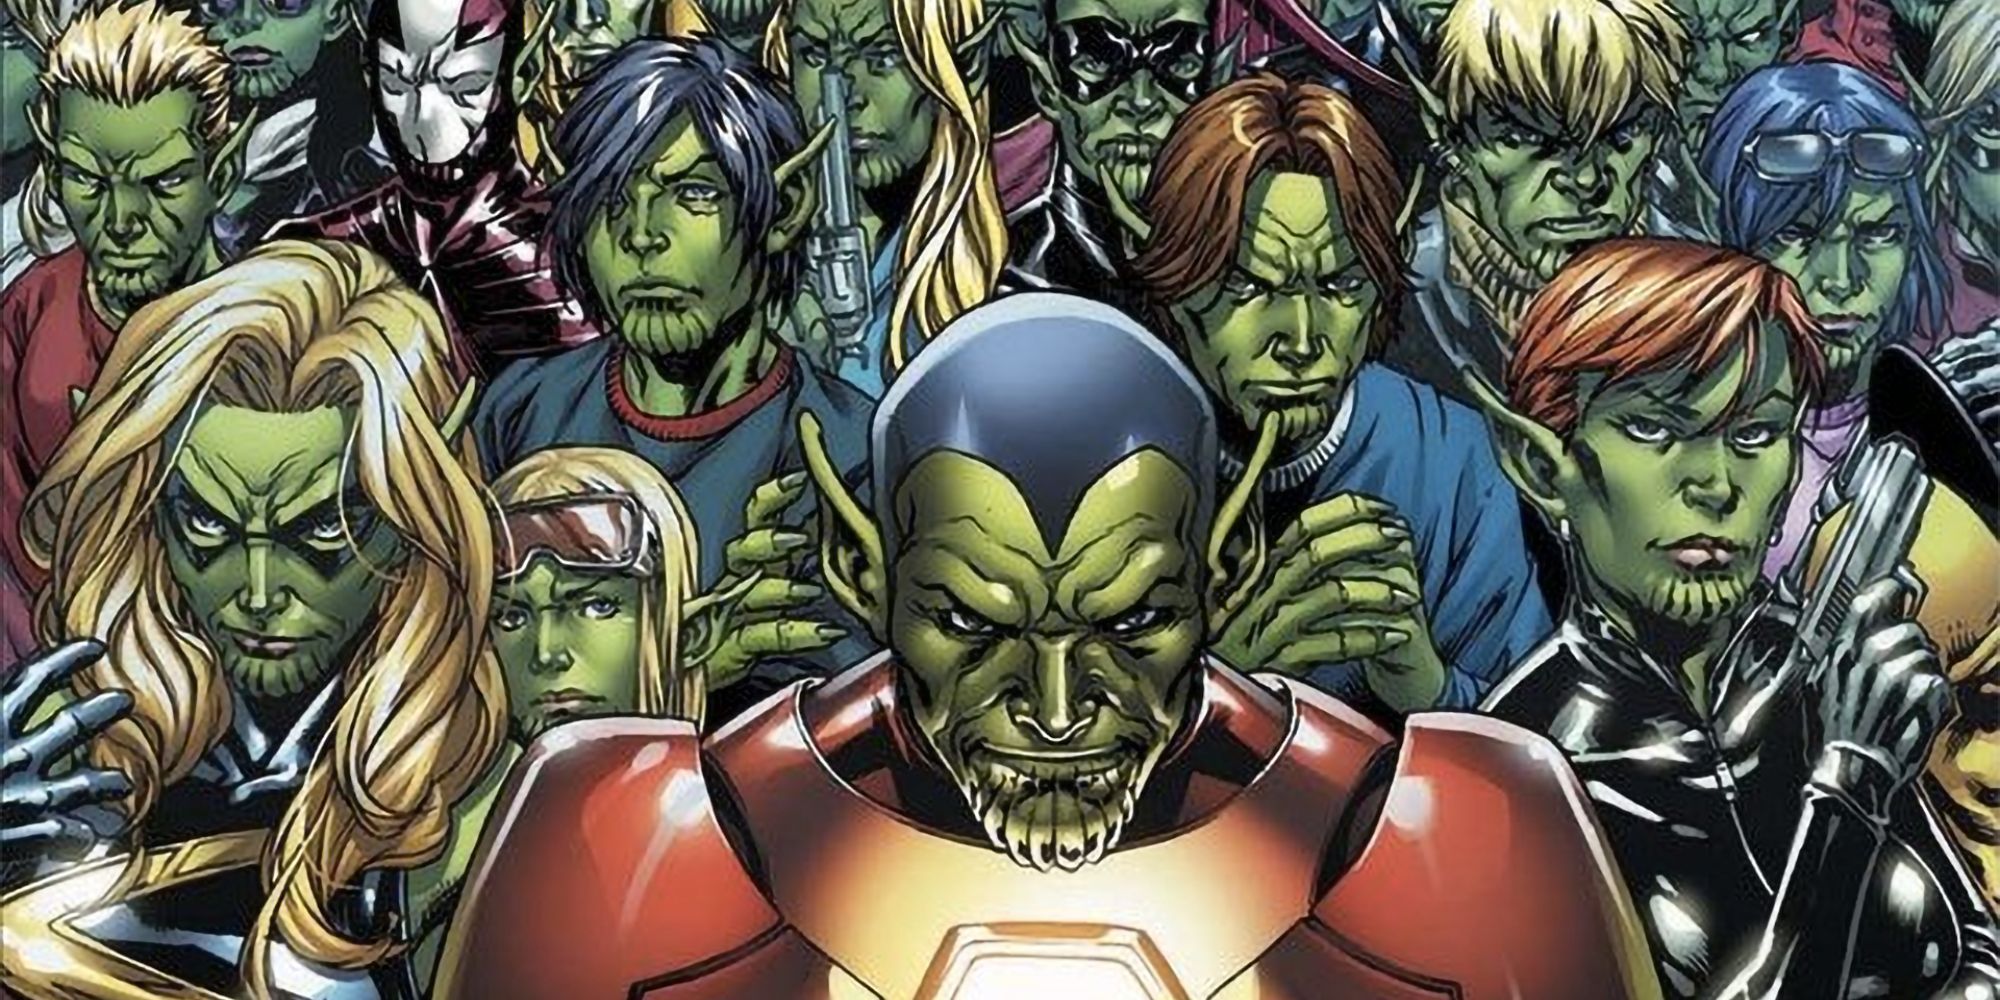 Comic book cover of the Skrulls dressed as the Avengers, including Iron Man and Black Widow